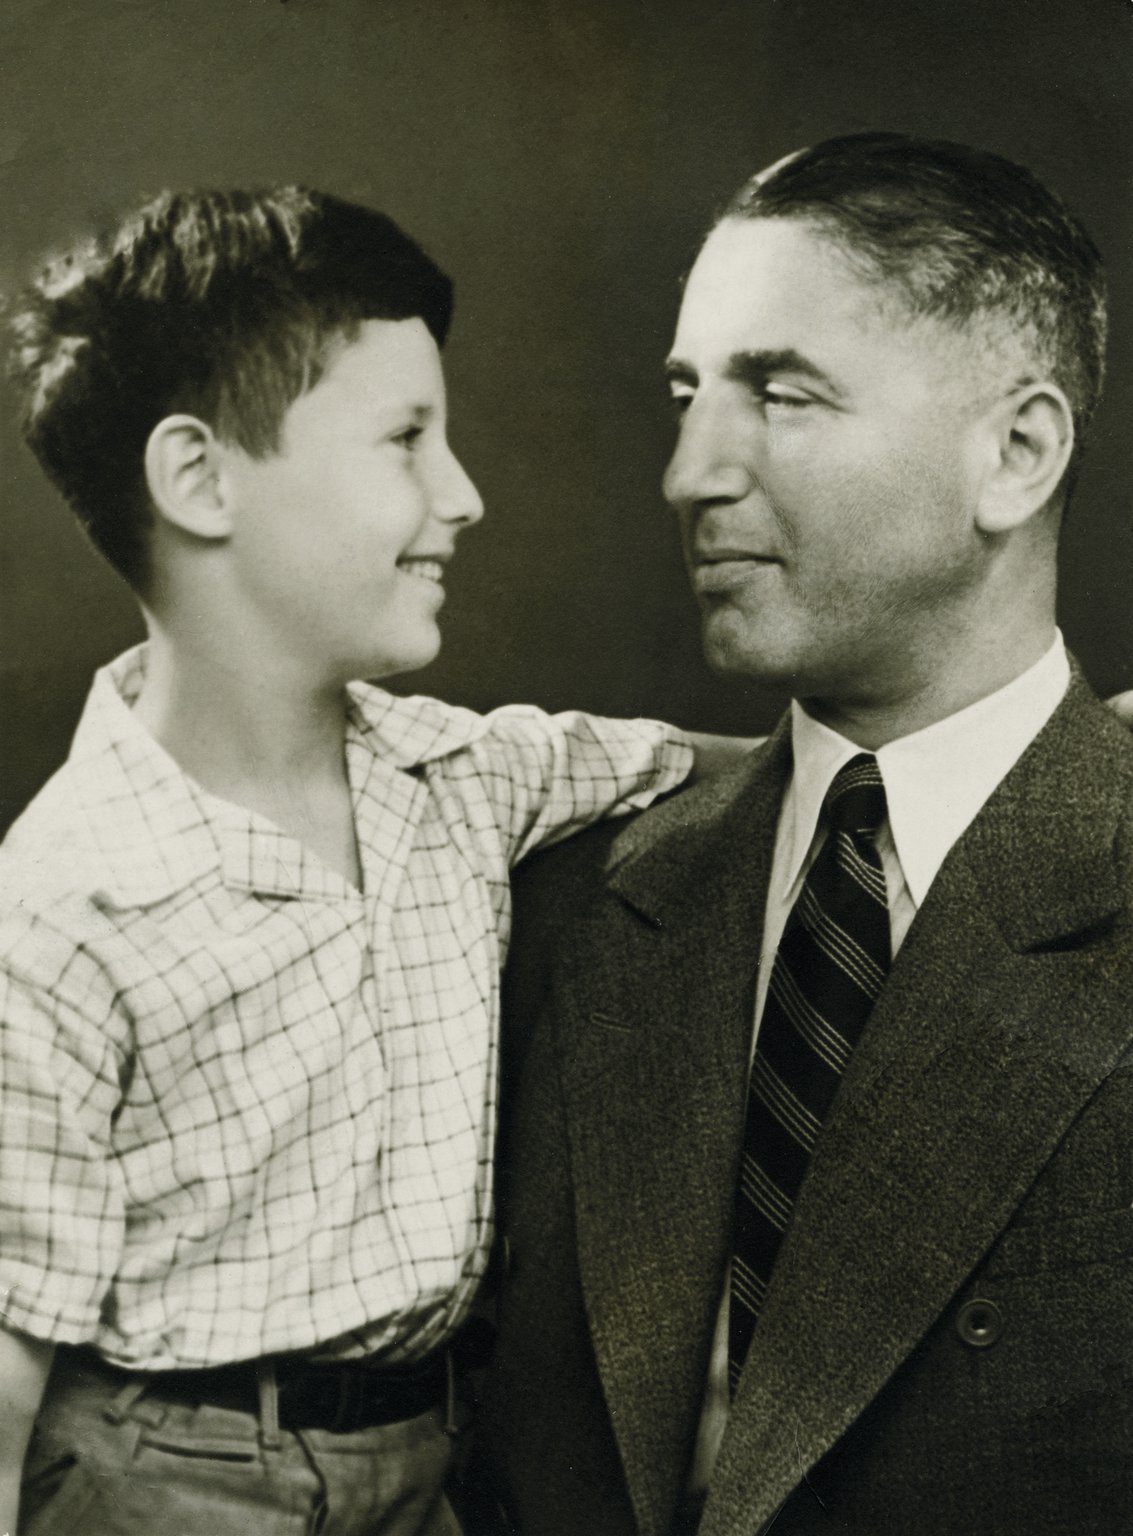 Fritz Pfeffer with his son Werner, around 1938. Werner survived the war and eventually moved to the US, where he assumed the name Peter Pepper. He died in 1995.